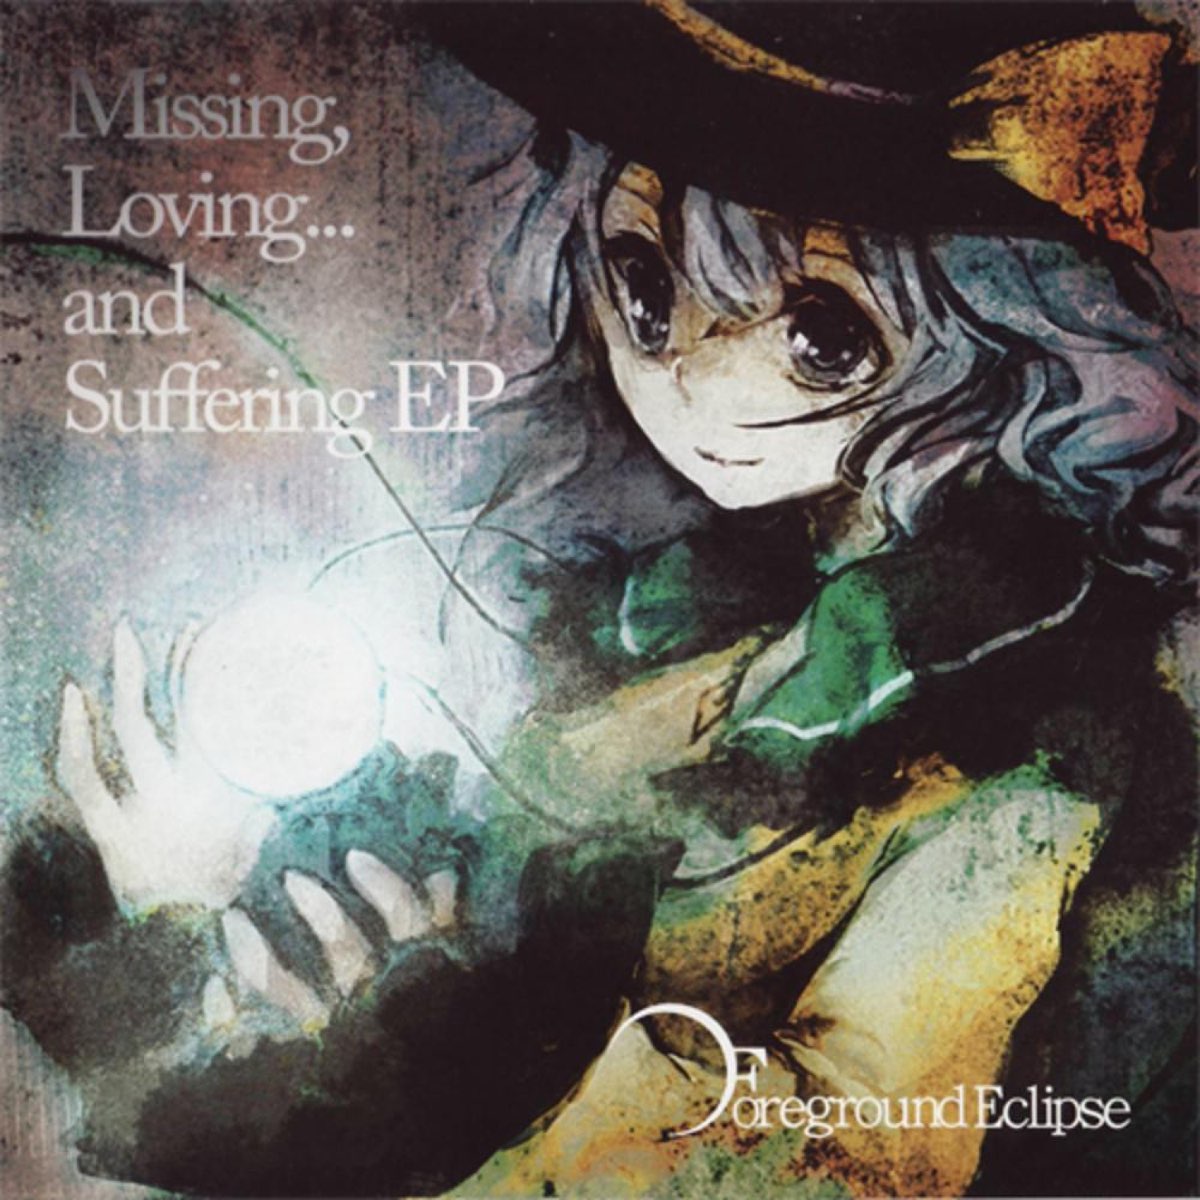 Missing,Lovingand Suffering EP - Album by Foreground Eclipse 